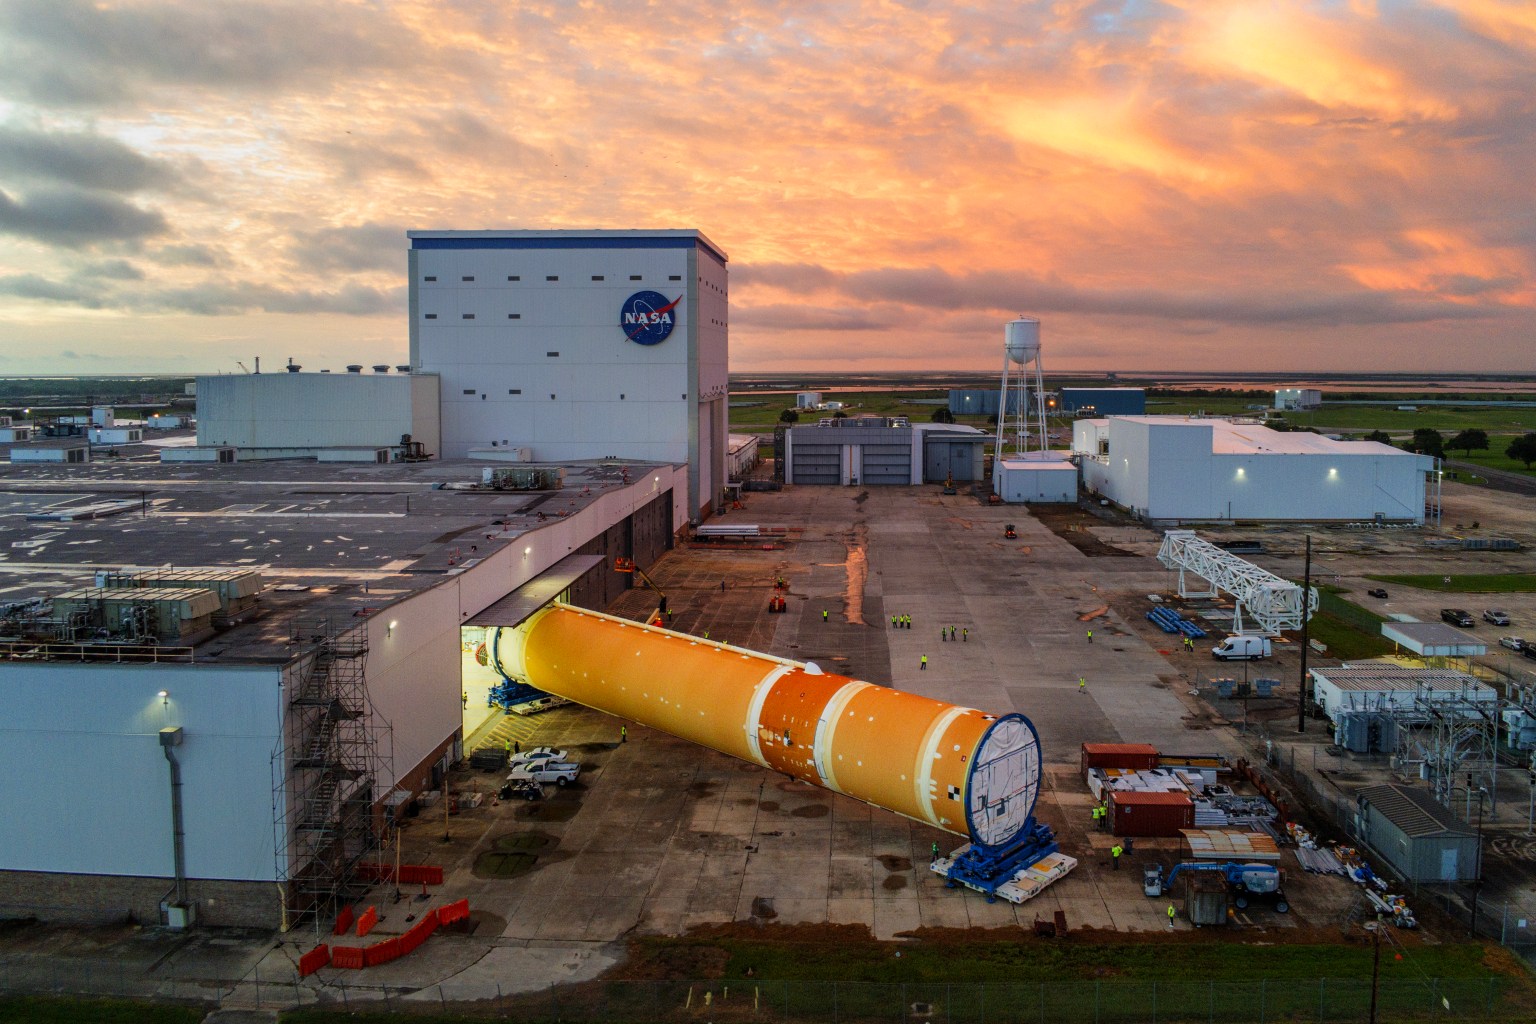 The Artemis II Core Stage moves from final assembly to the VAB at NASA's Michoud Assembly Facility in New Orleans in preparation for delivery to Kennedy Spaceflight Center later this month. Image credit: NASA/Michael DeMocker